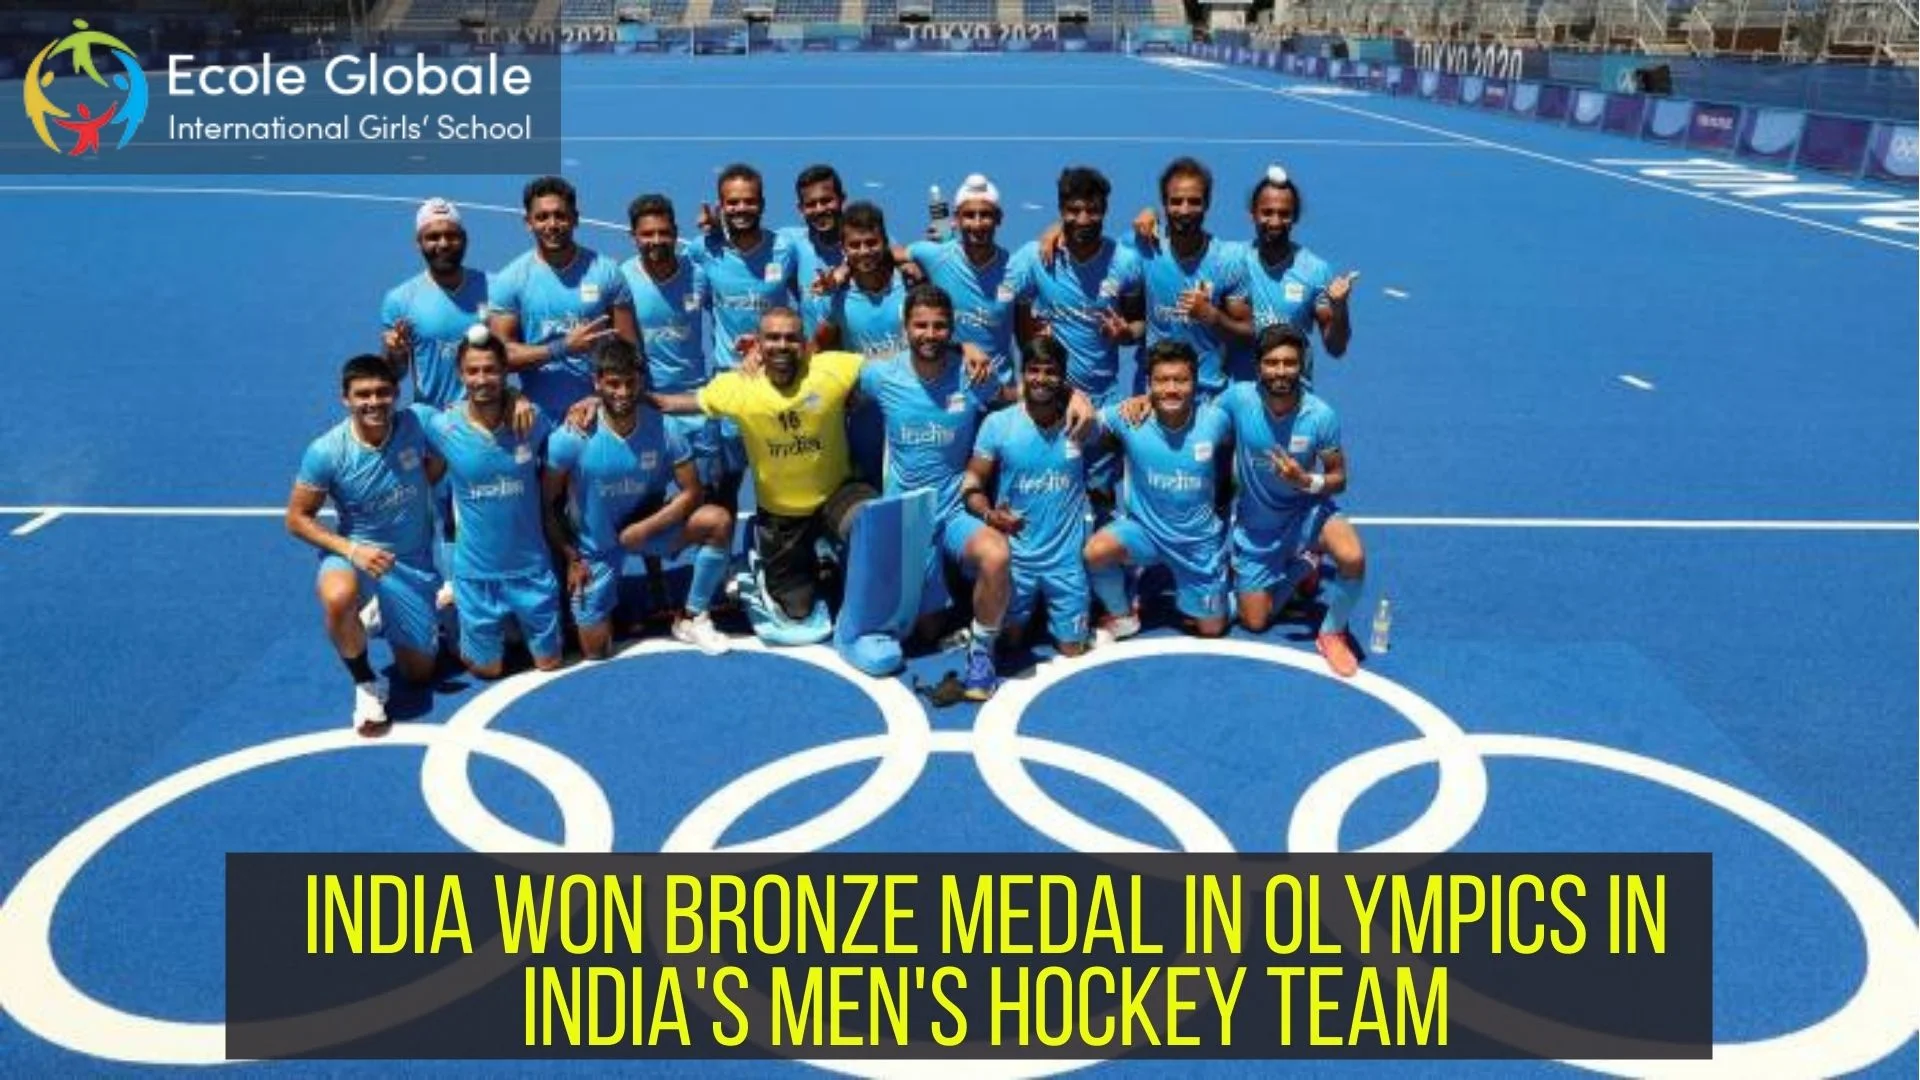 You are currently viewing INDIA WON BRONZE MEDAL IN OLYMPICS IN INDIA’S MEN’S HOCKEY TEAM